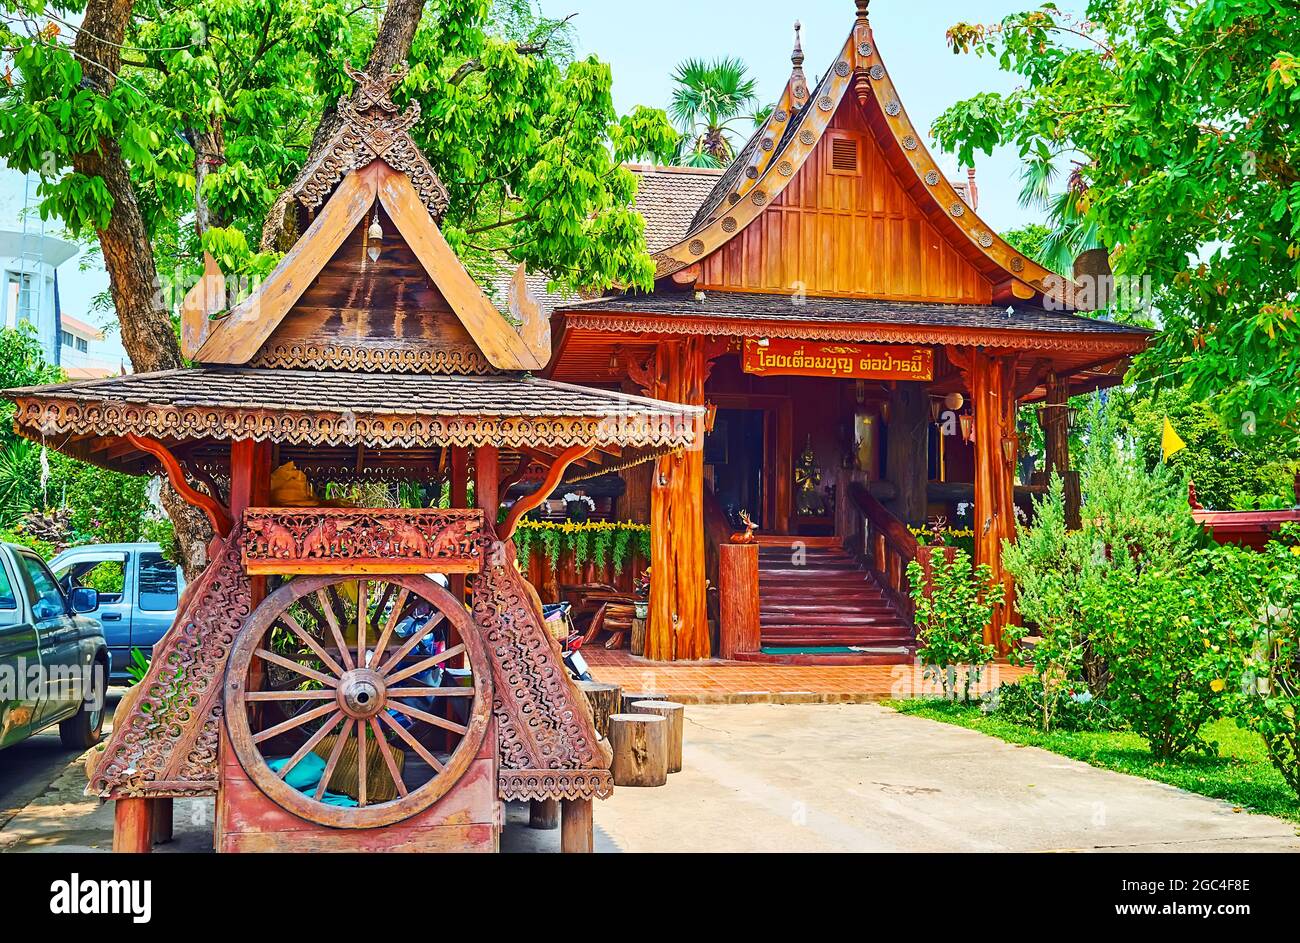 The scenic wooden shrine, decorated with carved details, located in Wat Chammathewi Temple, Lamphun, Thailand Stock Photo